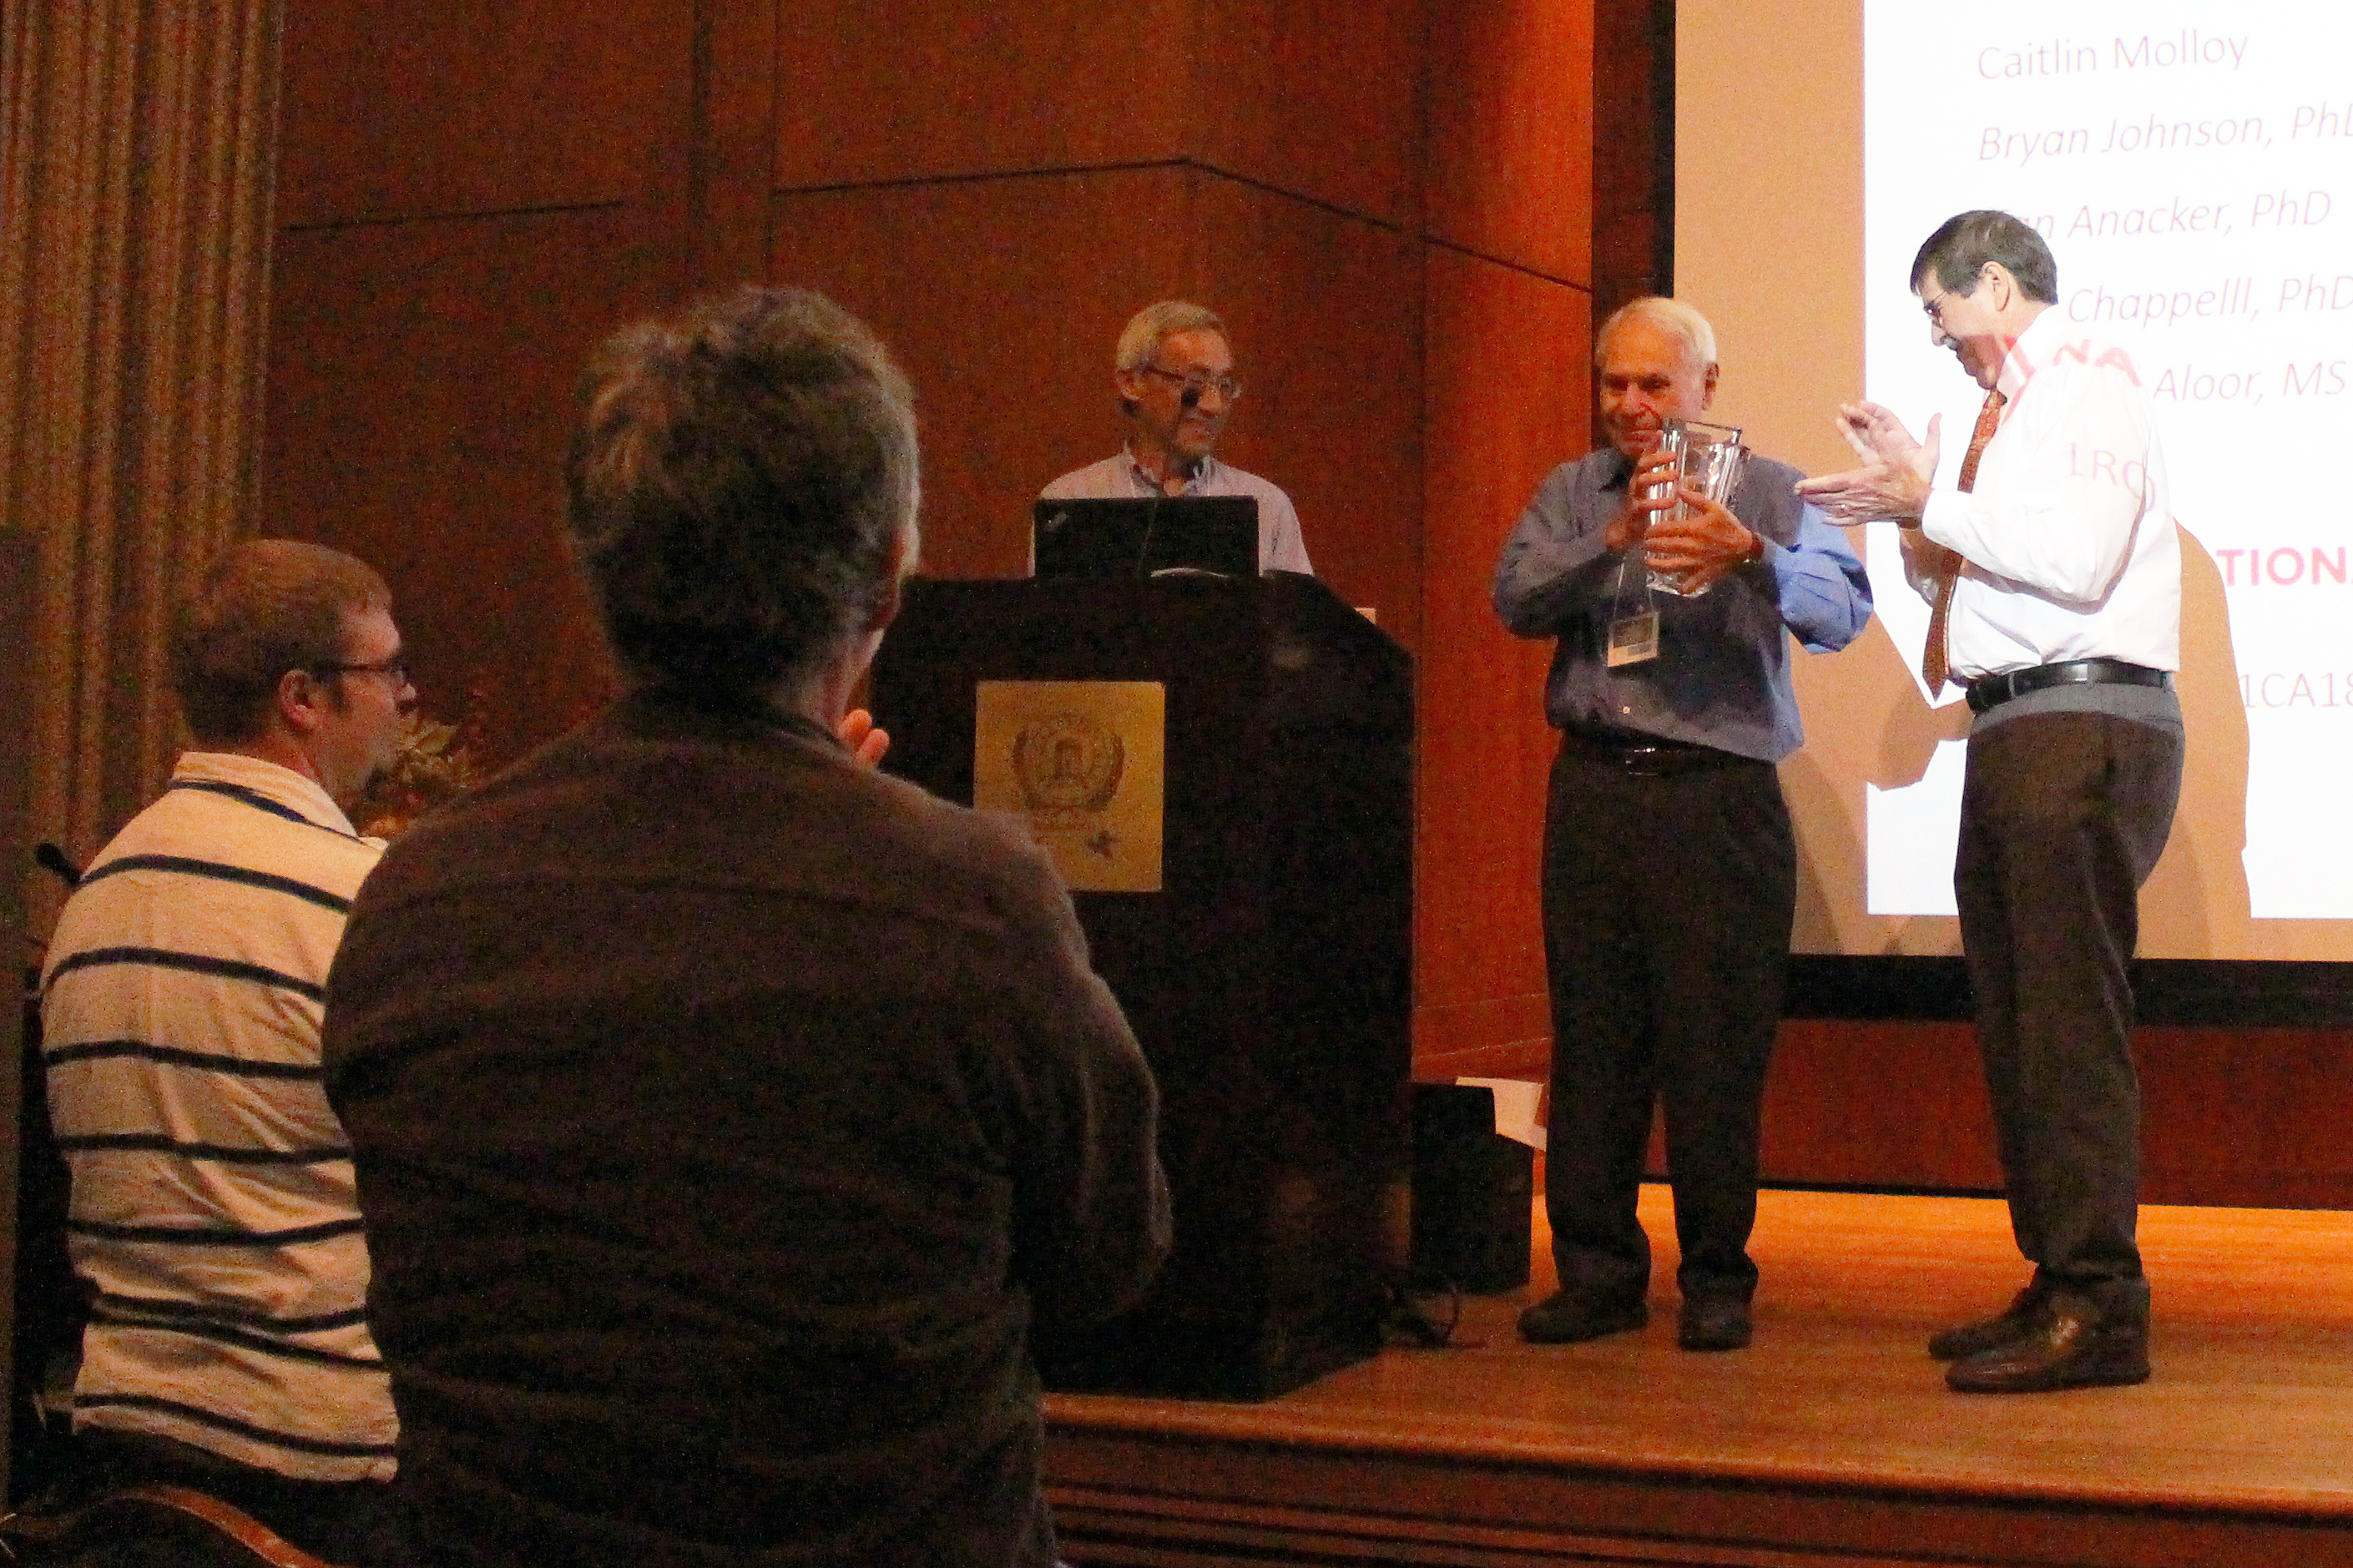 Joseph Pagano, MD, UNC Lineberger director emeritus, was honored at the center's 42nd Annual Postdoc Faculty Research Day.